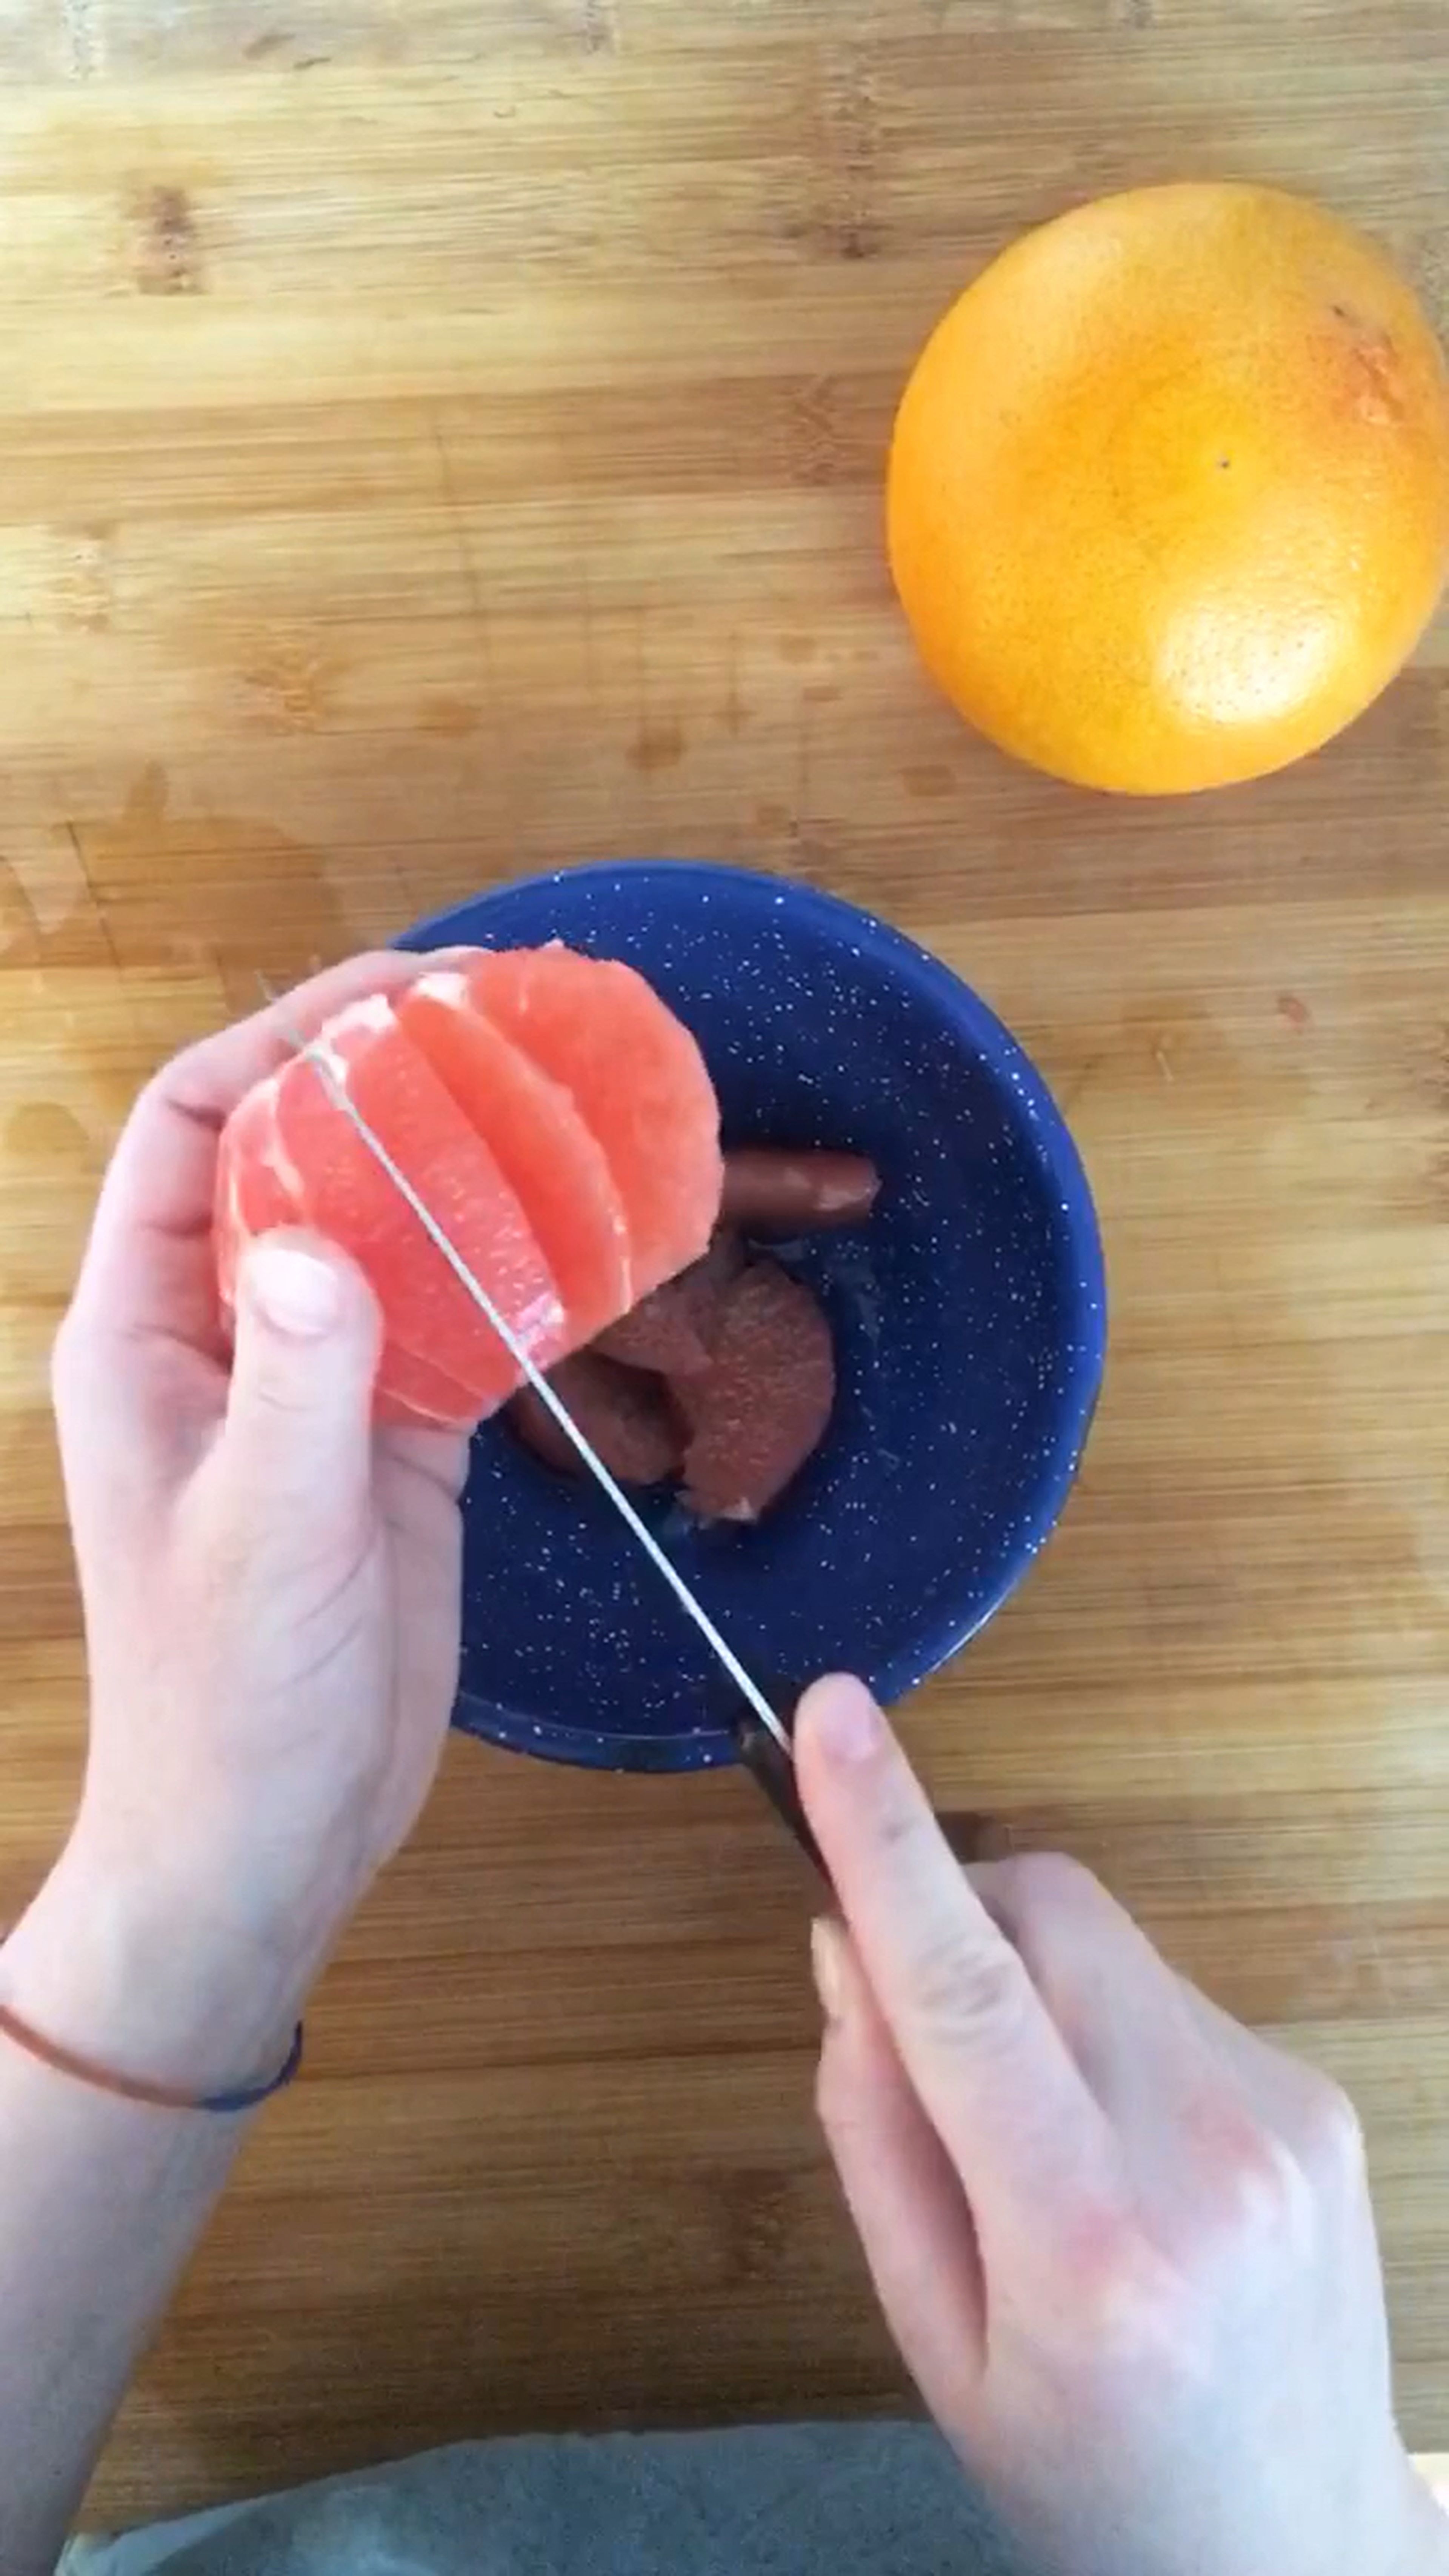 Segment the grapefruit over a bowl, then squeeze the rest of the juice out.